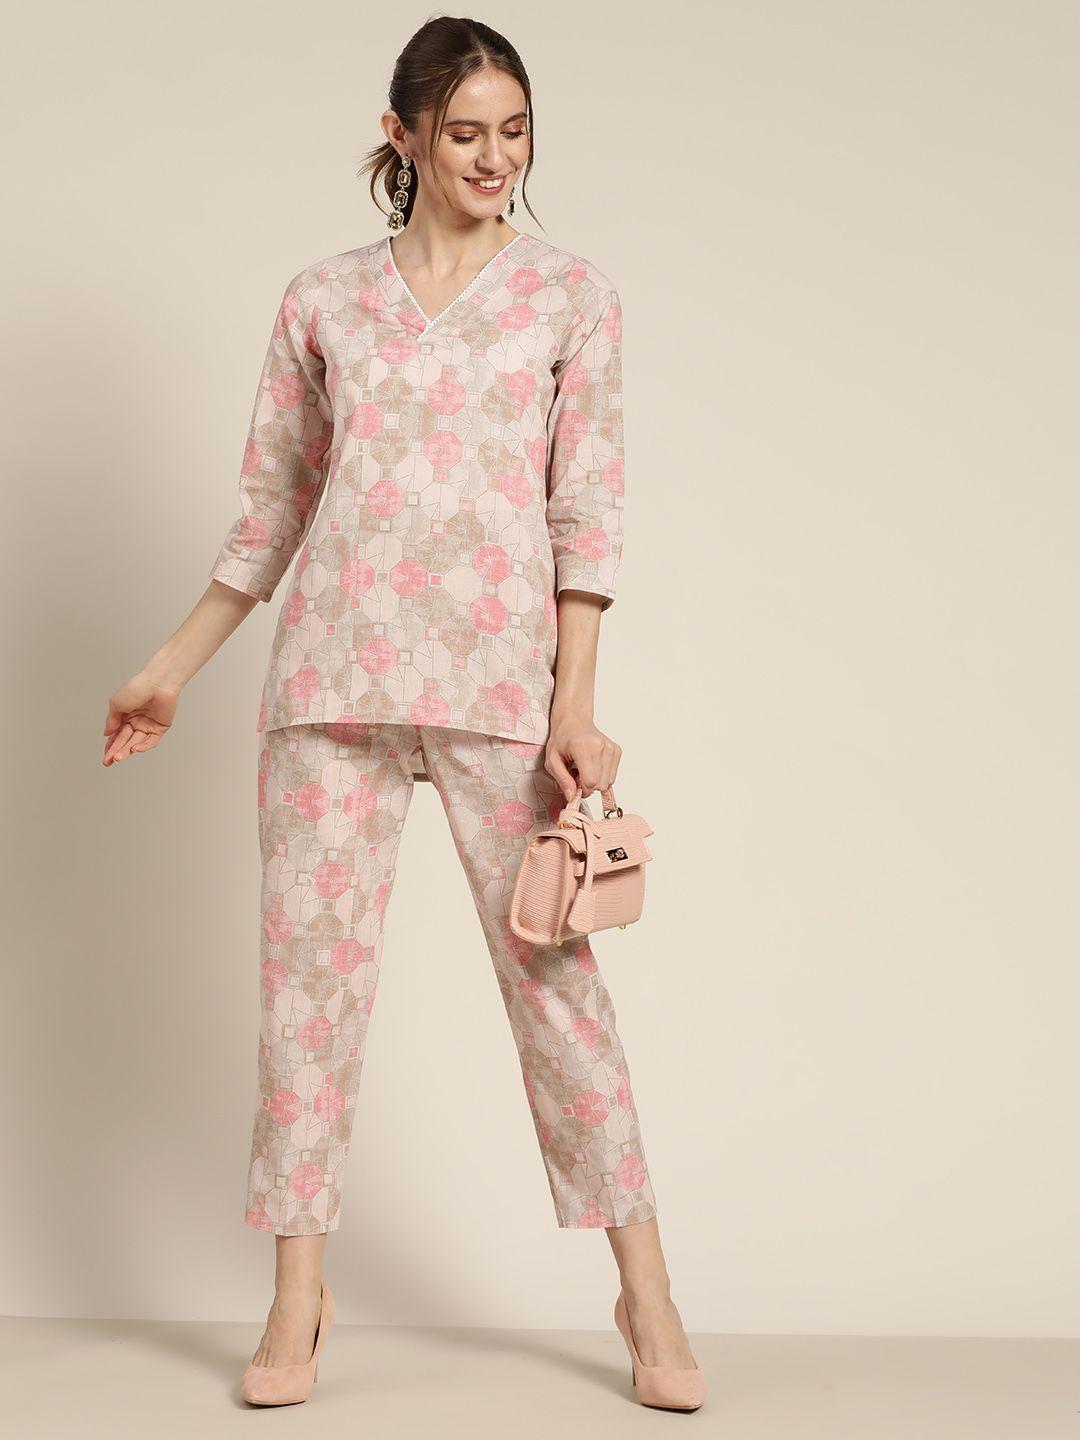 shae-by-sassafras-women-pink-printed-trousers